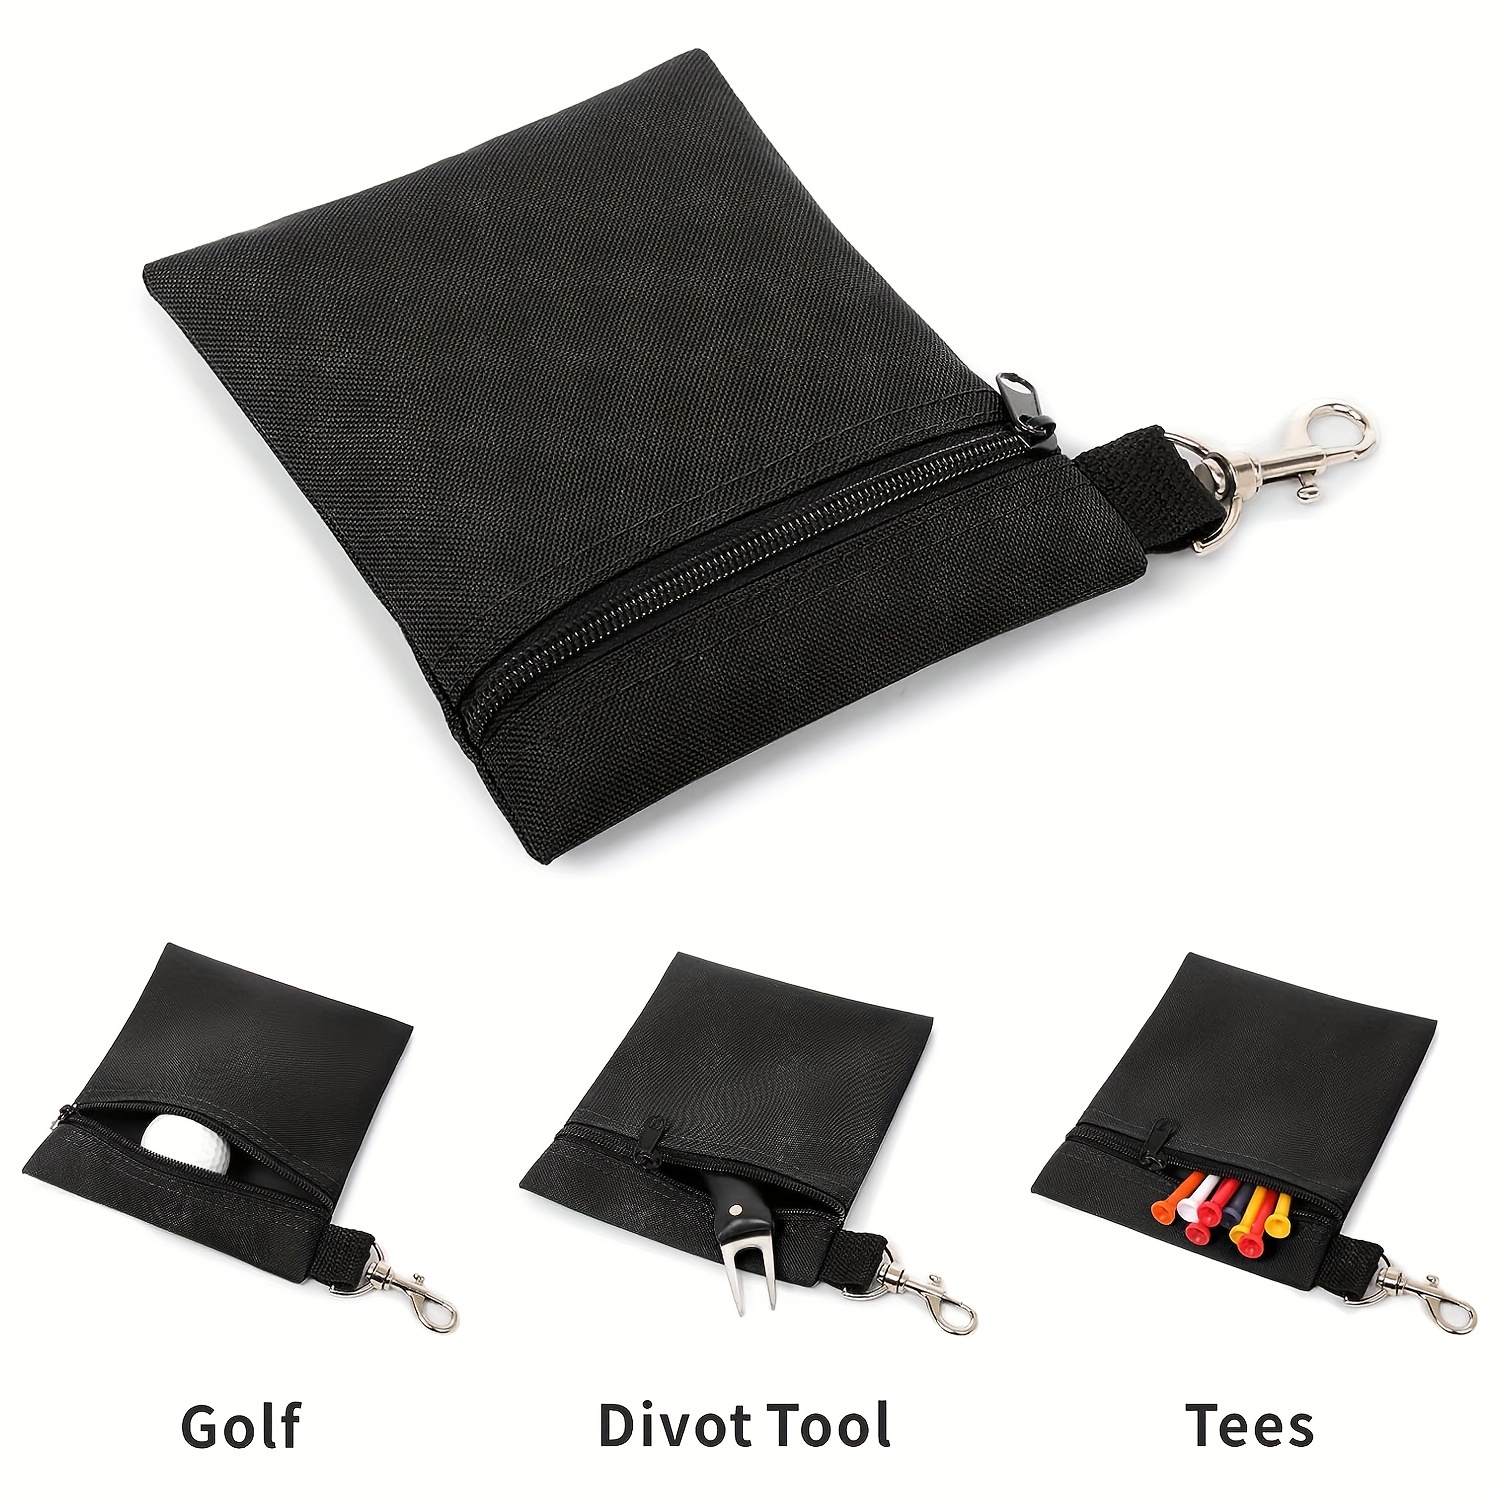 Professional Zippered Pouch